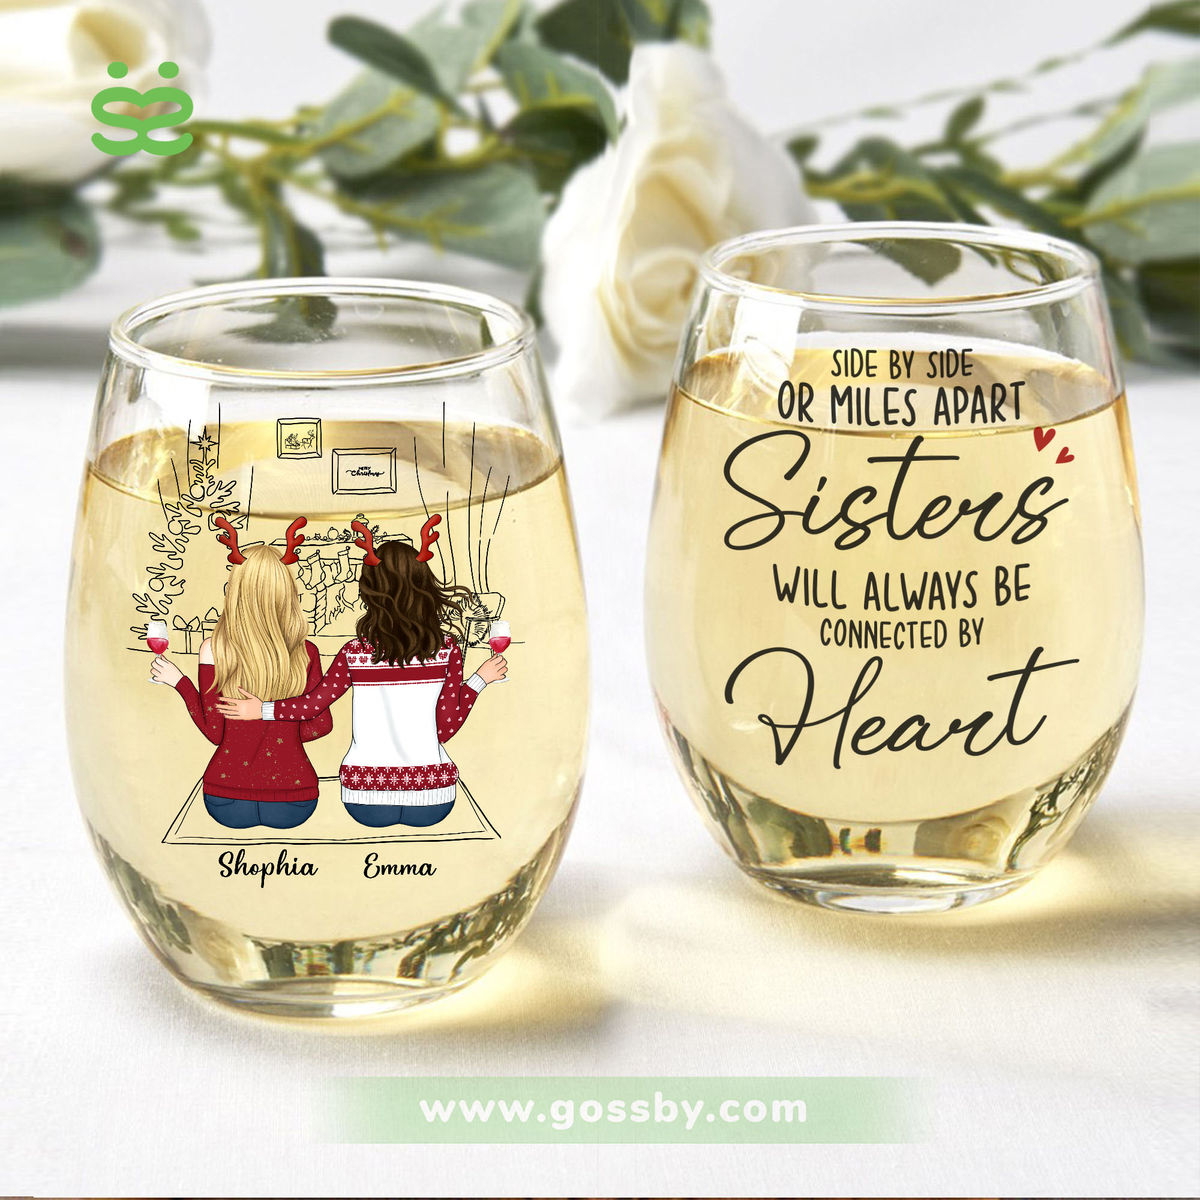 Wine Glass - Side by side or miles apart sisters will always be connected by heart H4_1